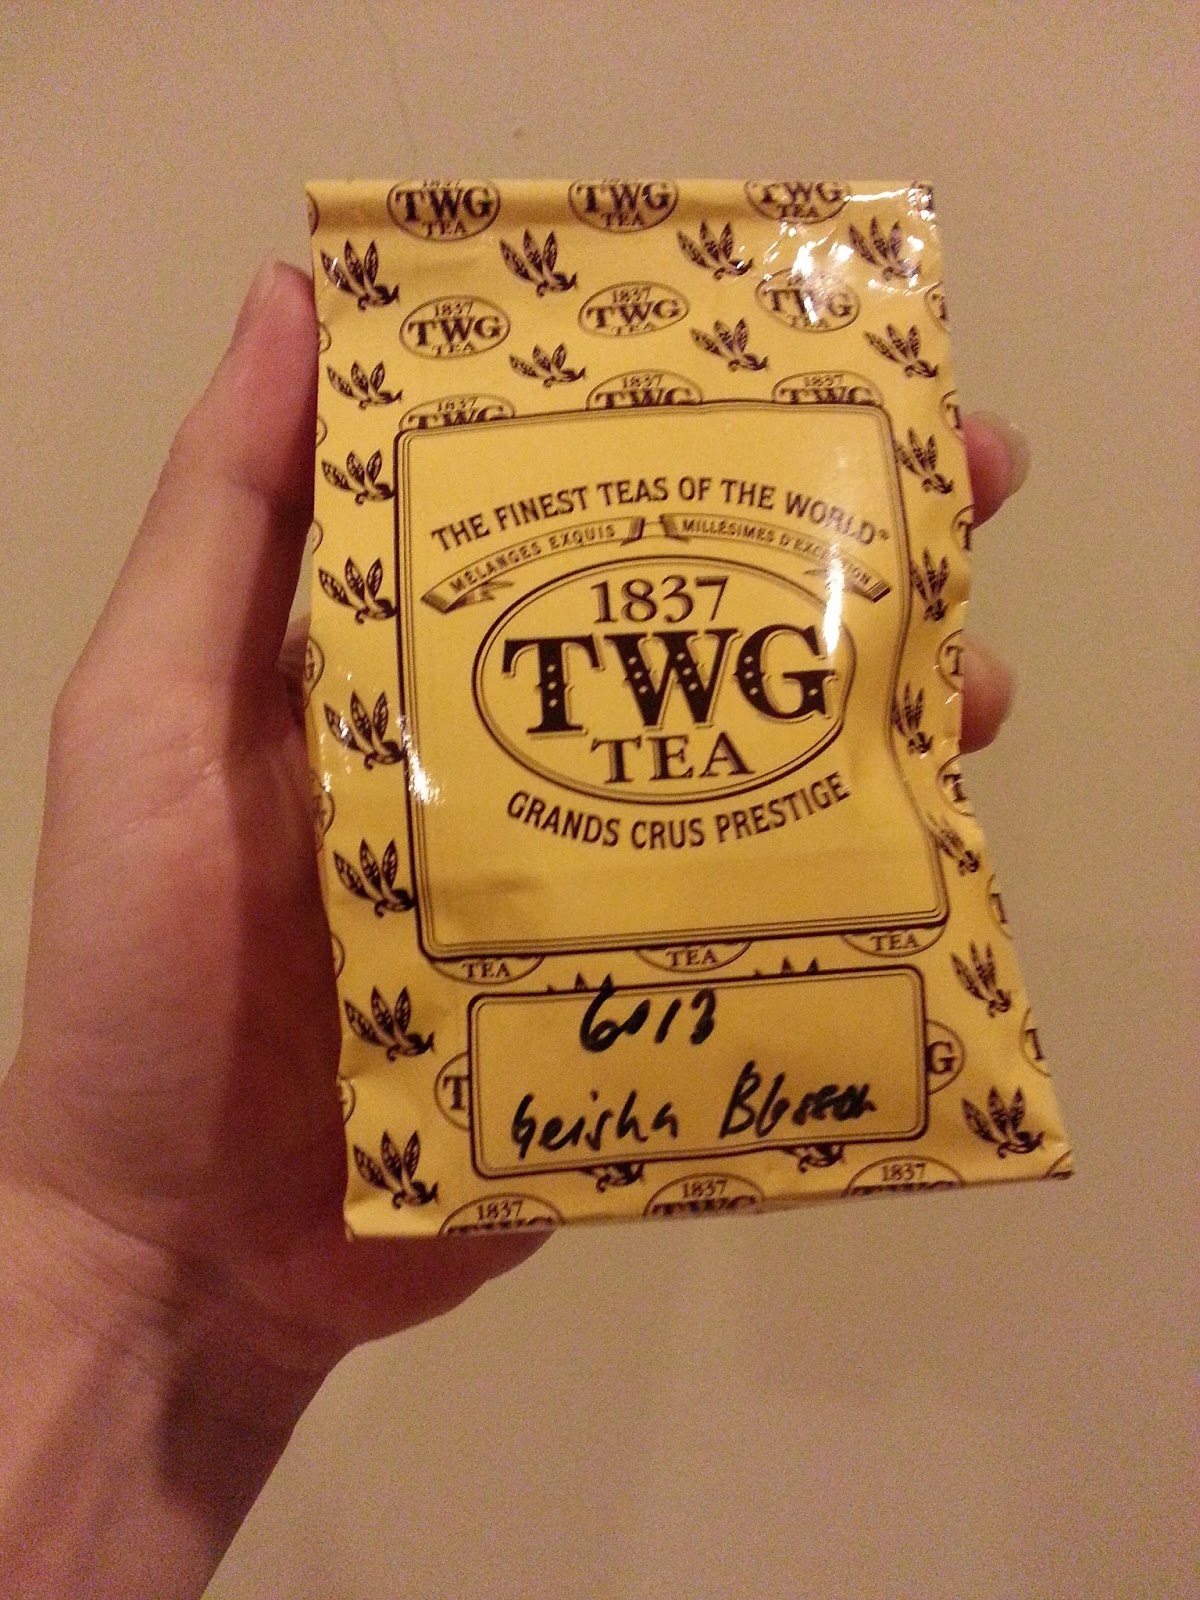 Sharing A Piece Of Me With You: Review of TWG Geisha Blossom 6012